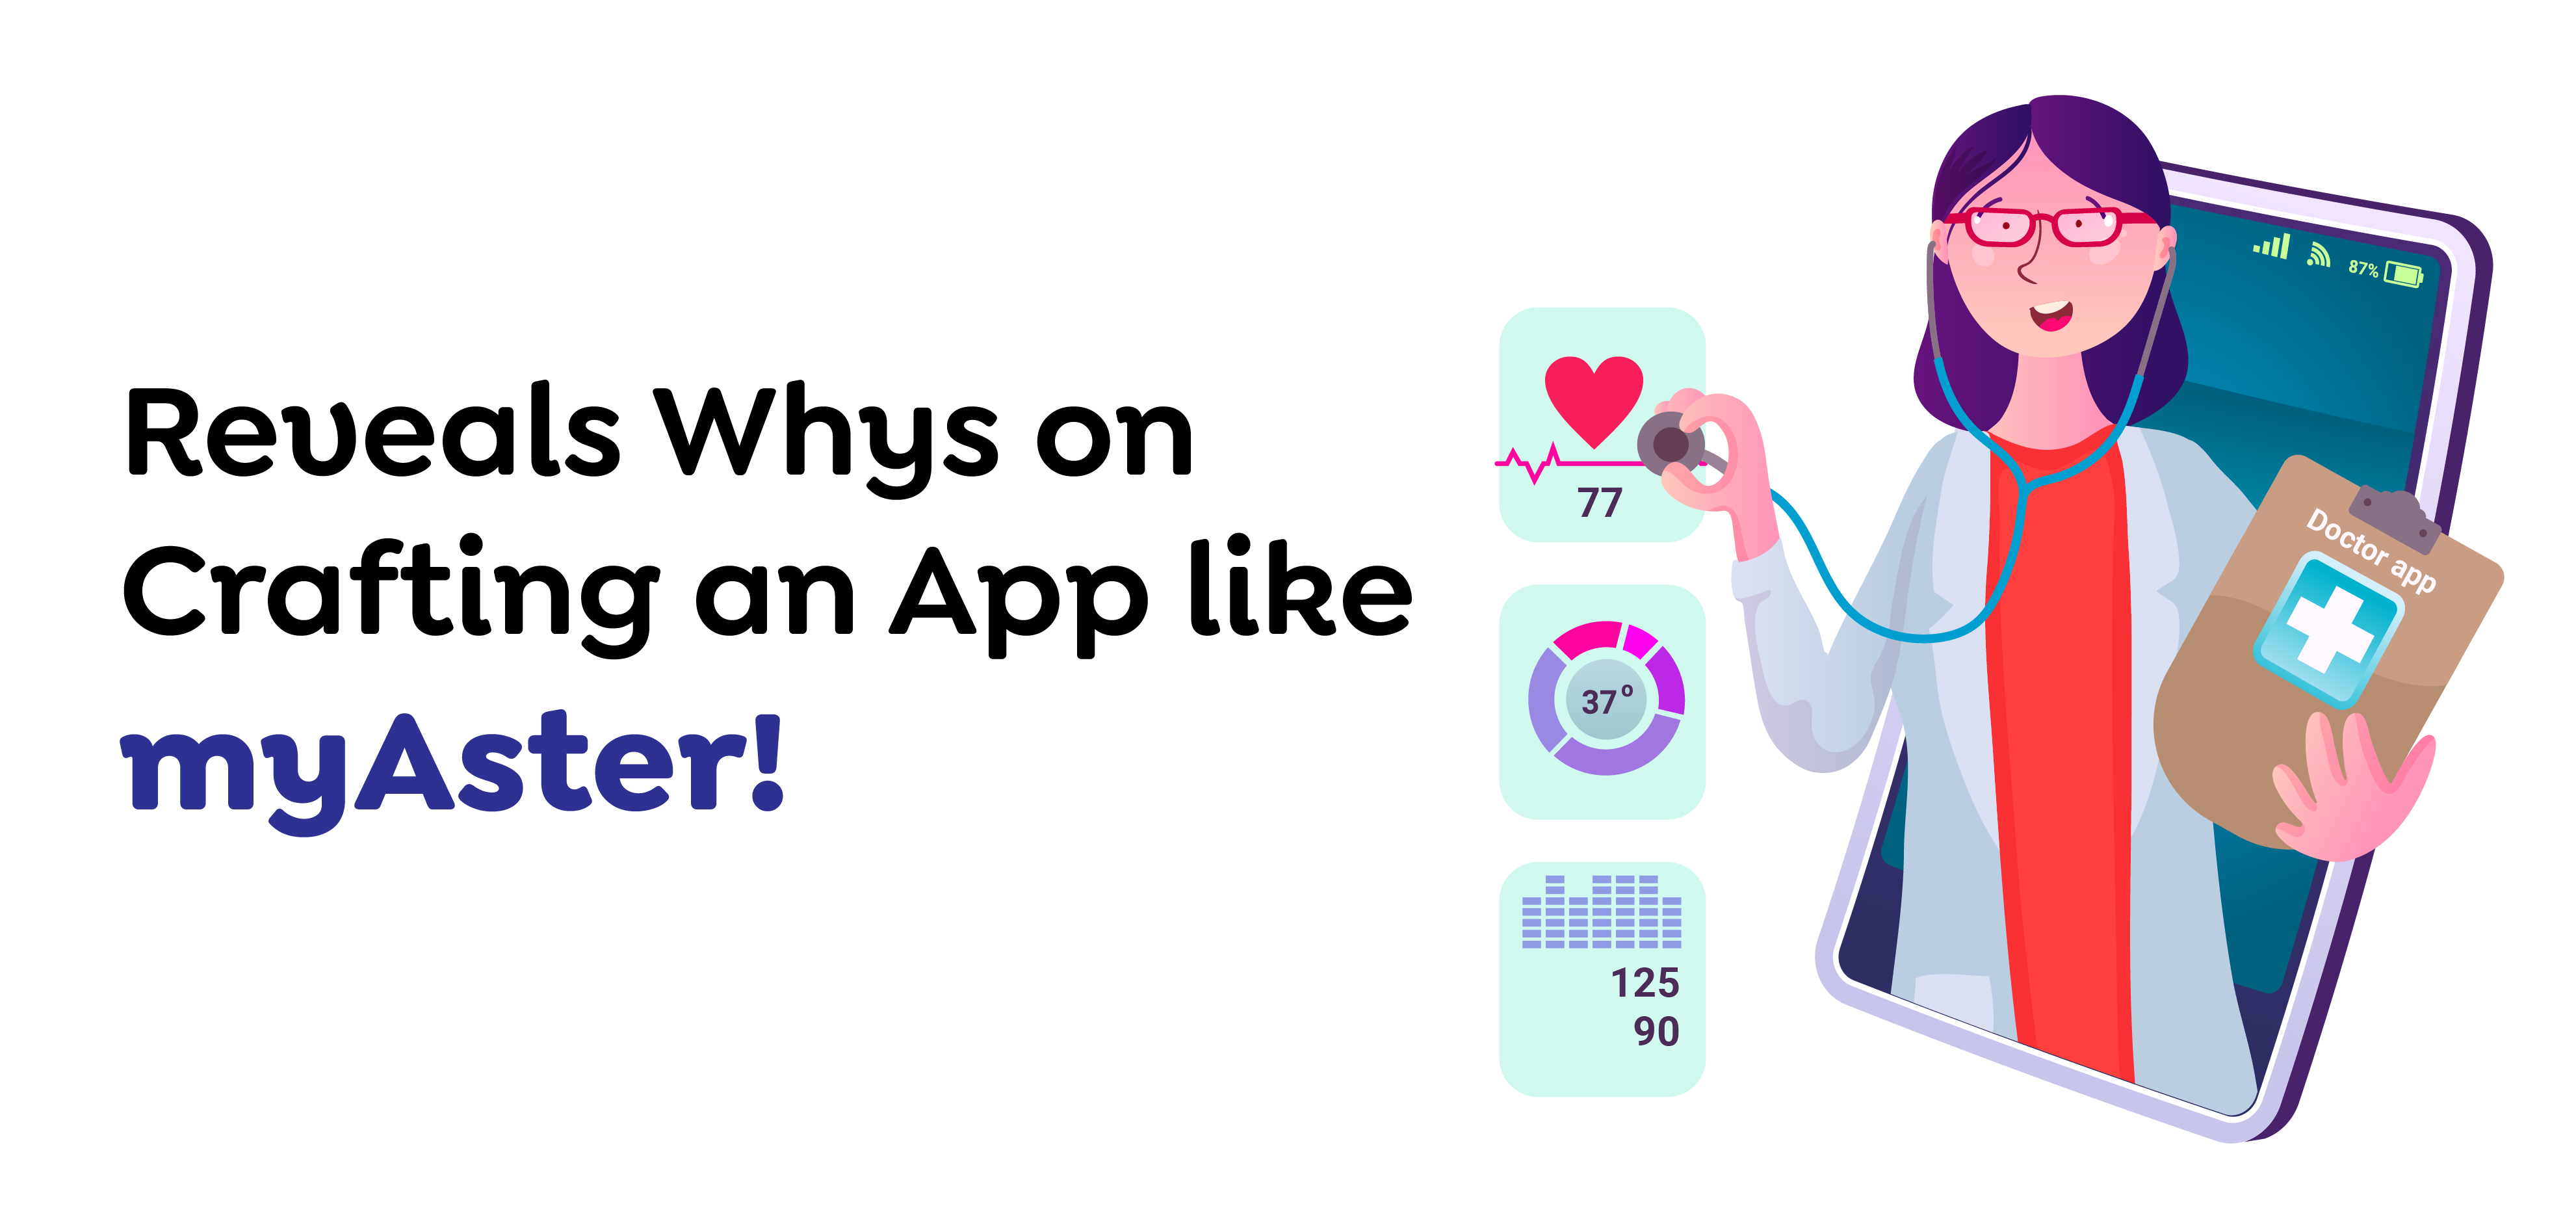 Reveals Whys on Crafting an App like myAster!